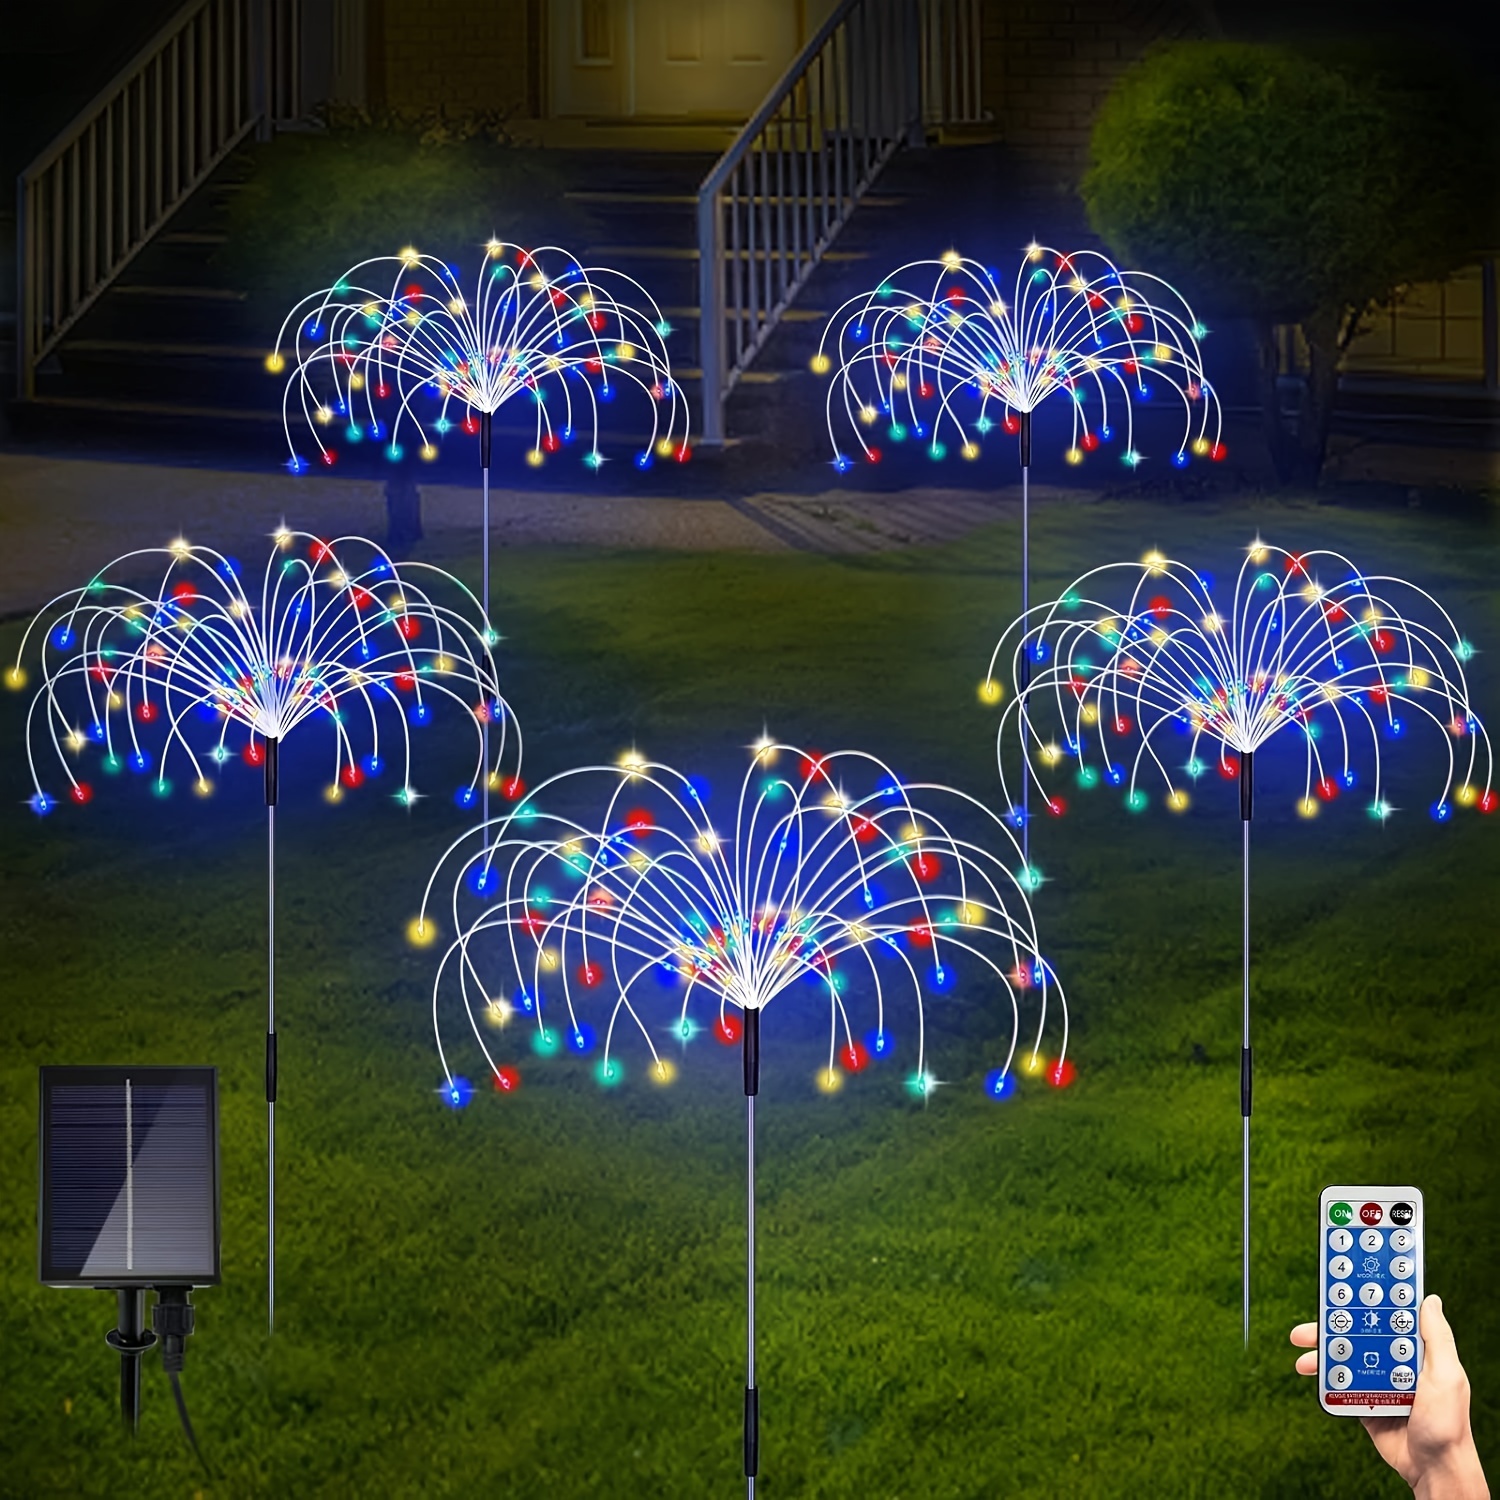 

Outdoor Firework Lights, 5 Pack 120 Led Decorative Stake With Remote, 8 Modes Diy Landscape Light Lamps For Walkway Pathway Backyard Lawn(colorful)